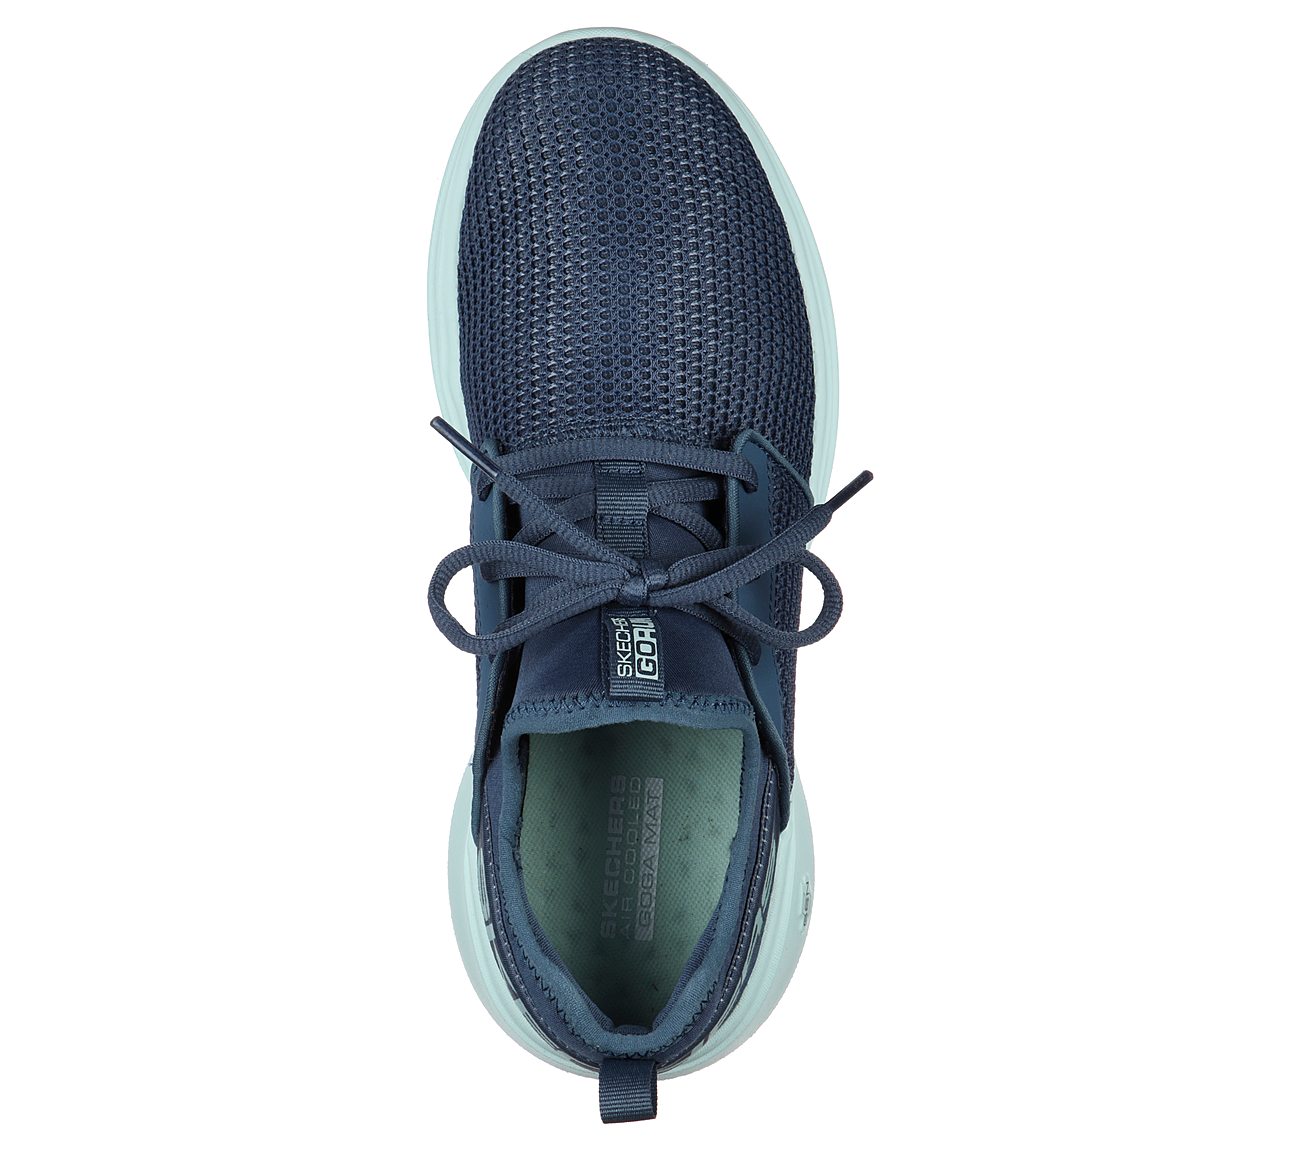 GO RUN FAST - QUICK STEP, BLUE/TURQUOISE Footwear Top View